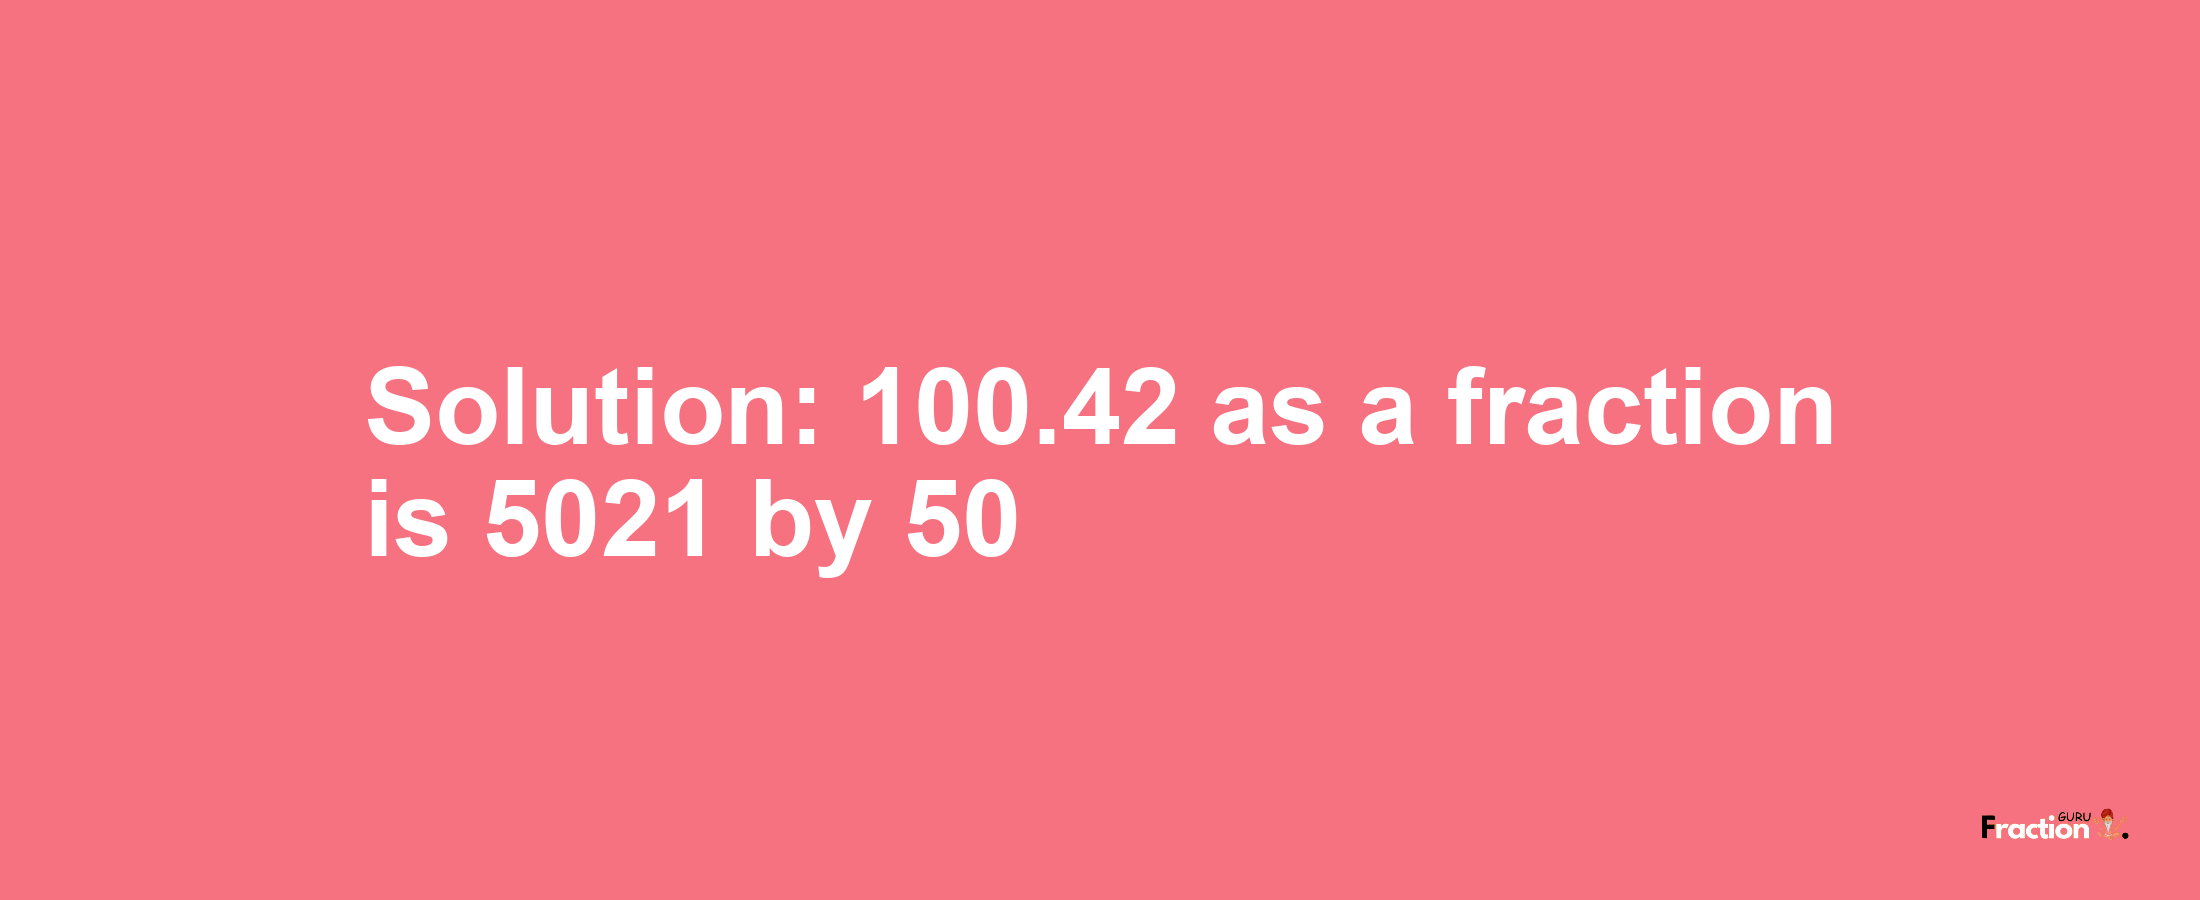 Solution:100.42 as a fraction is 5021/50